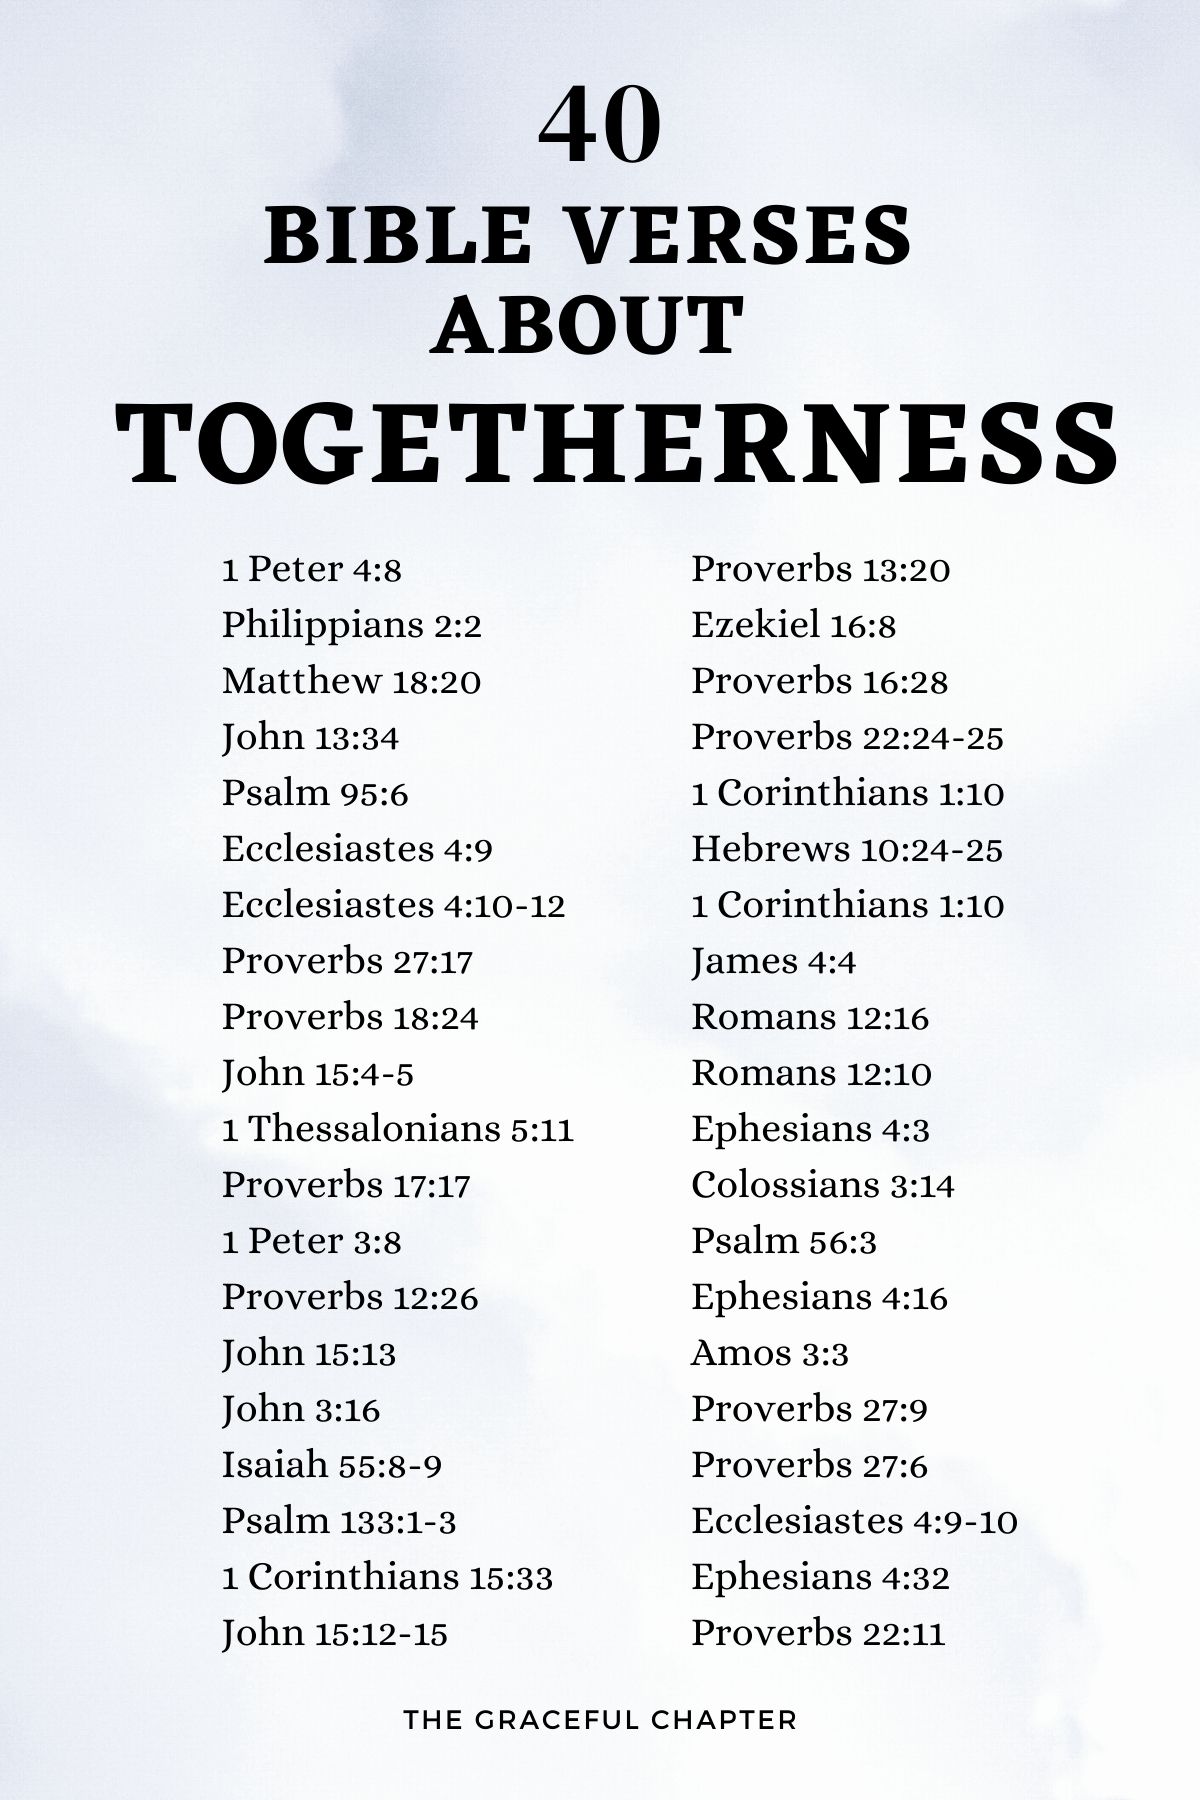 40 Bible Verses About Togetherness